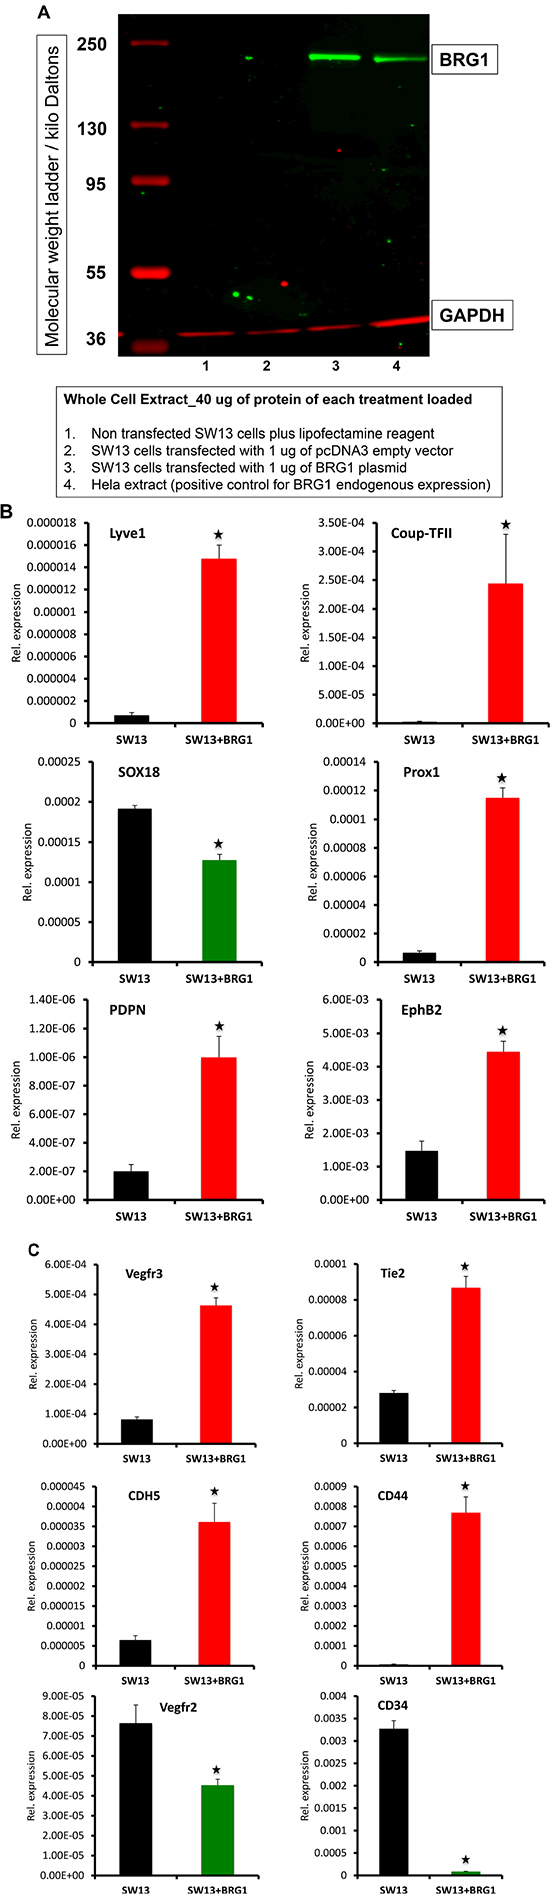 Transient expression of BRG1 in SW13 cells affects the expression of lymphatic and blood vascular endothelial related genes.